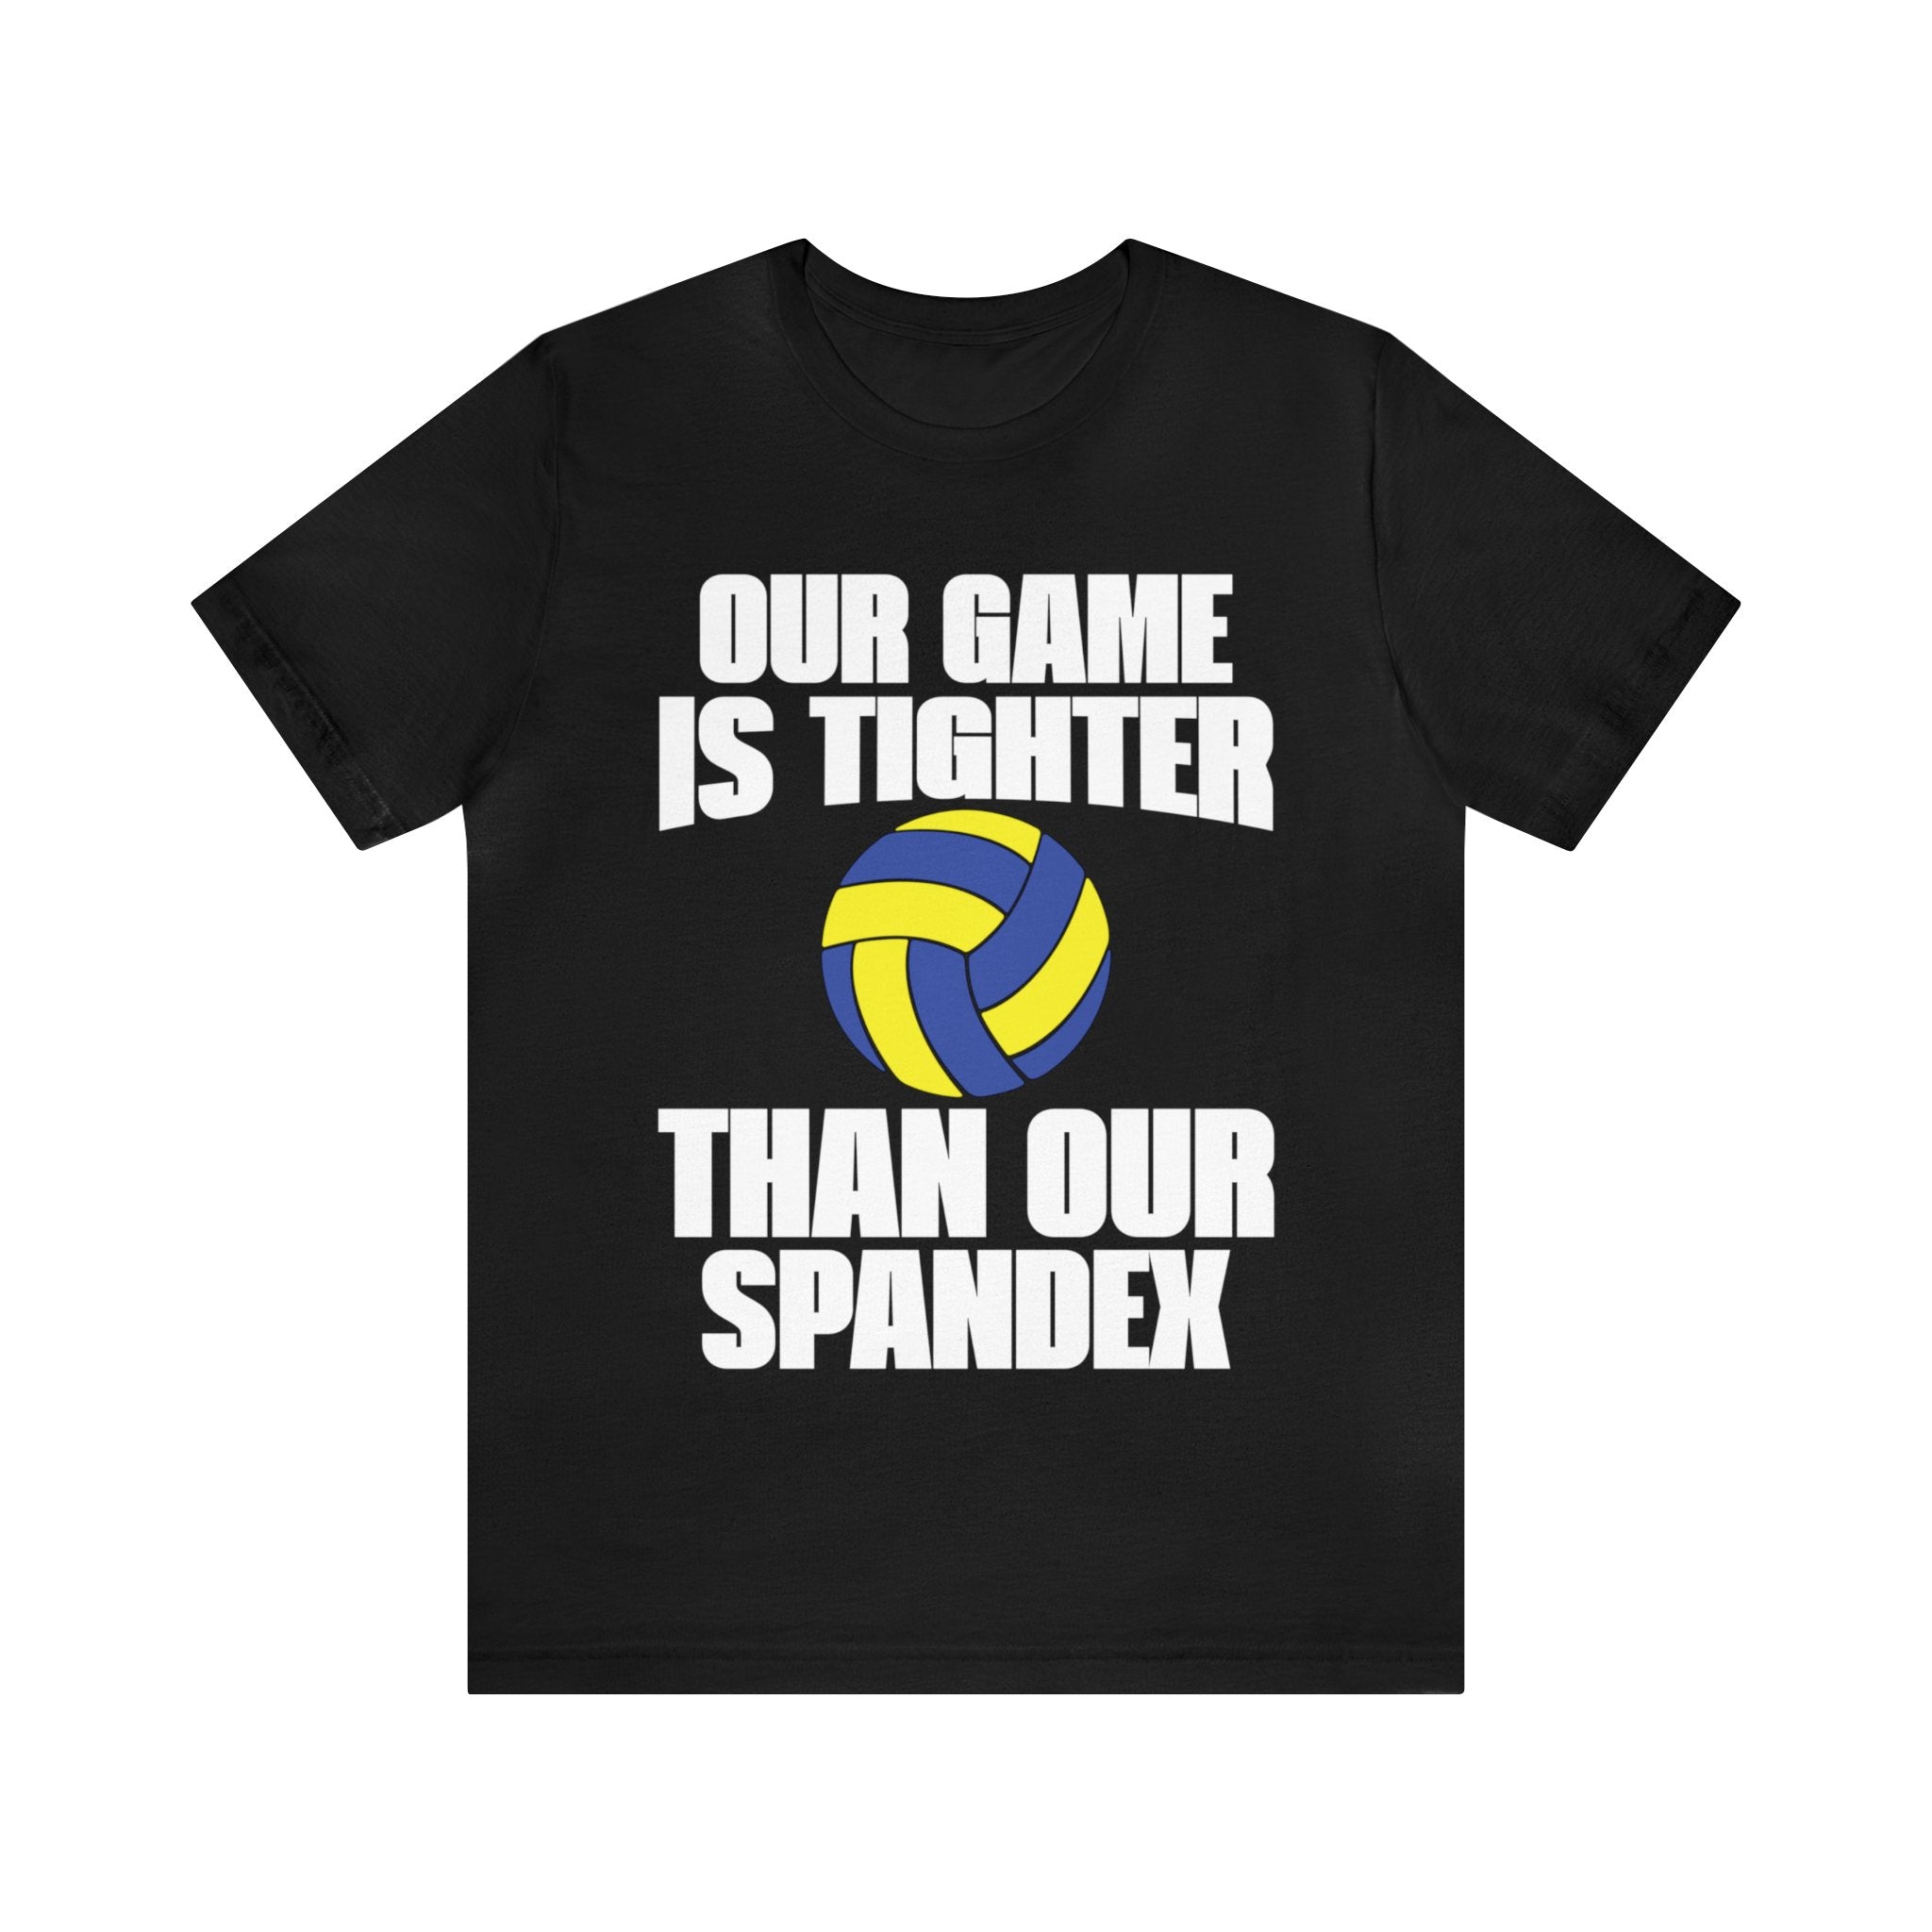 Our Game is Tighter than Spandex Tee